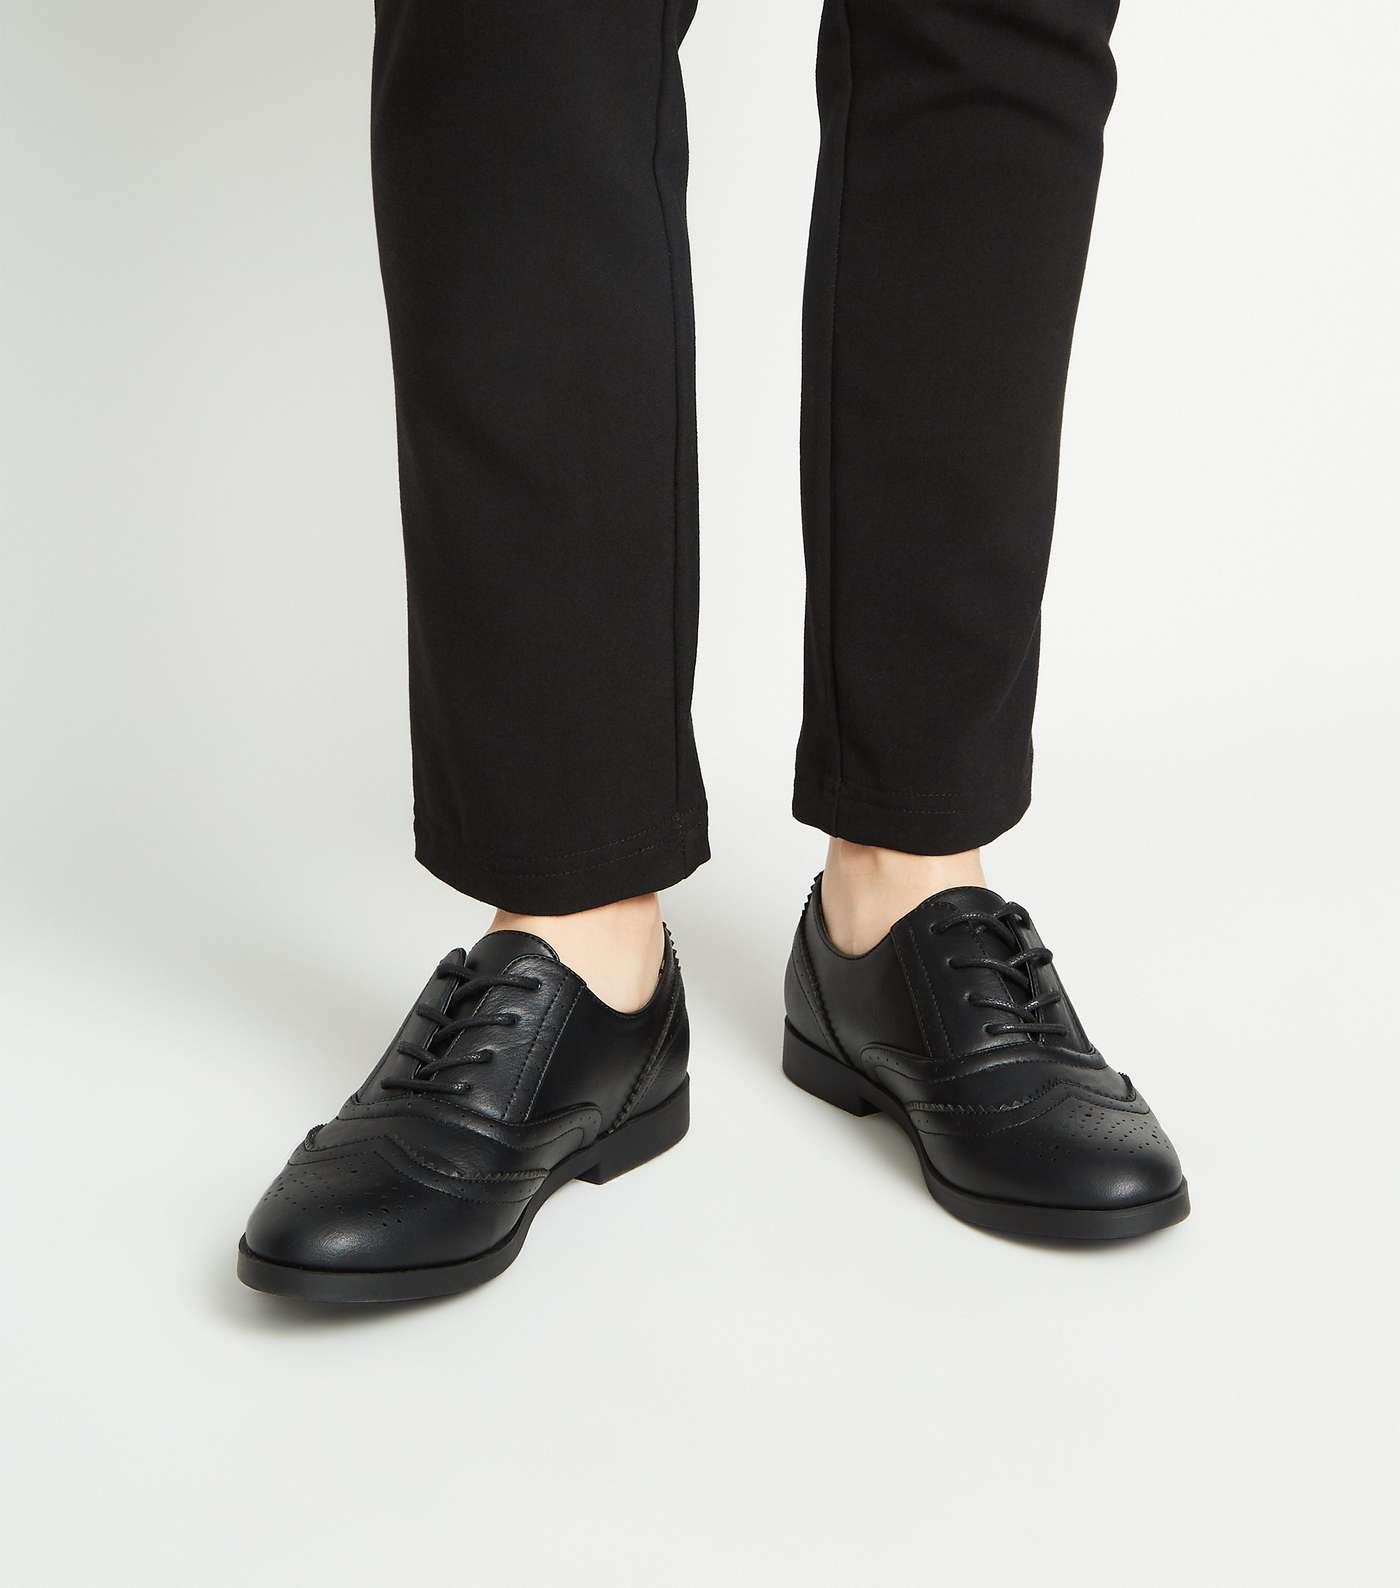 Girls Black Leather-Look Lace Up Brogues Image 2